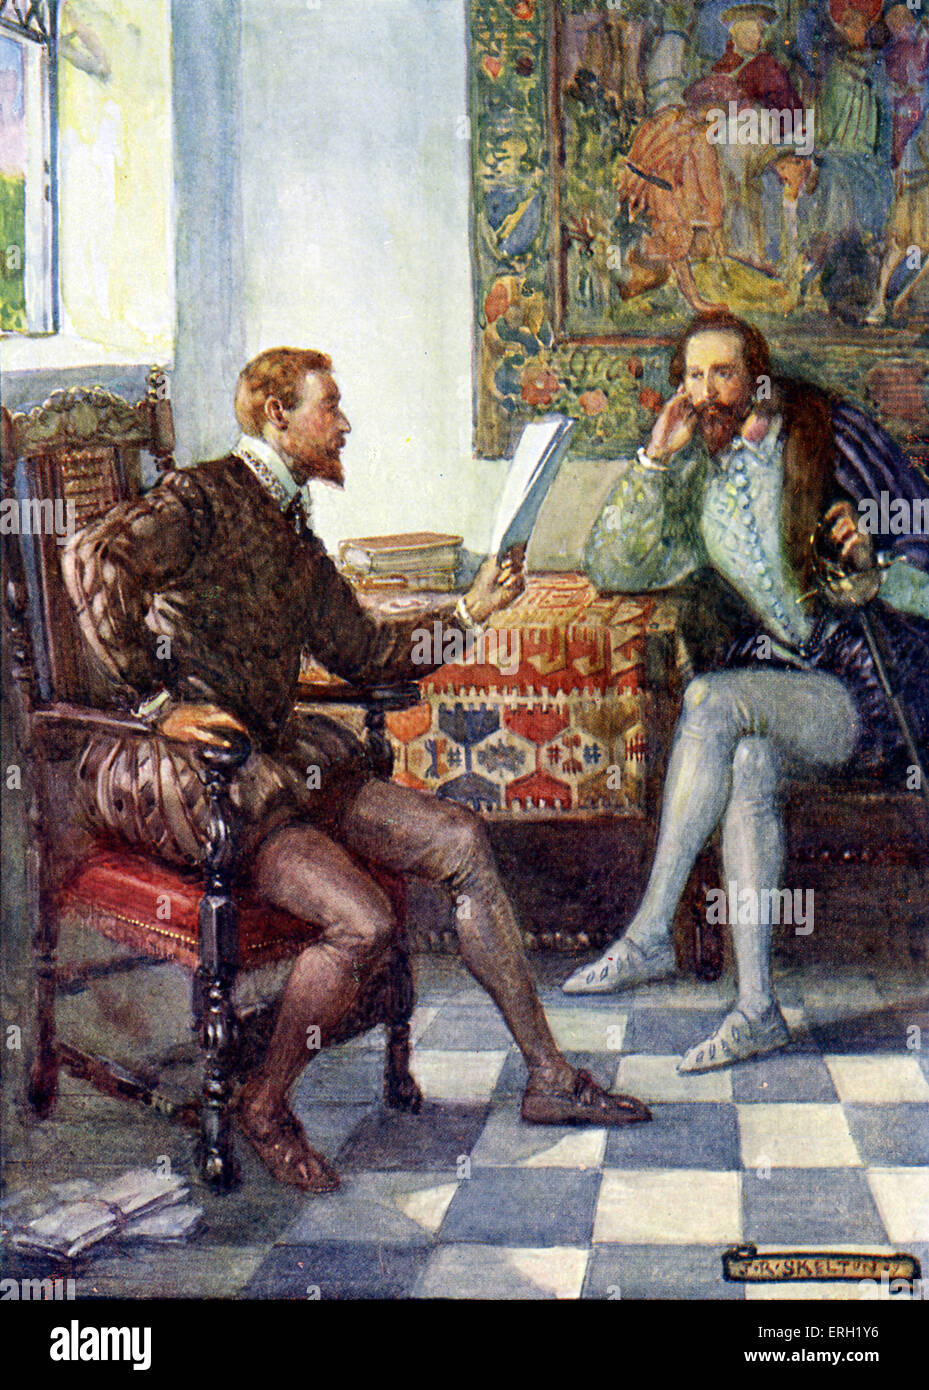 Spenser (Edmund) and Raleigh (Walker)  'Spenser read the first part of his book, 'The faery Queen' to Raleigh'. Illustration by Stock Photo